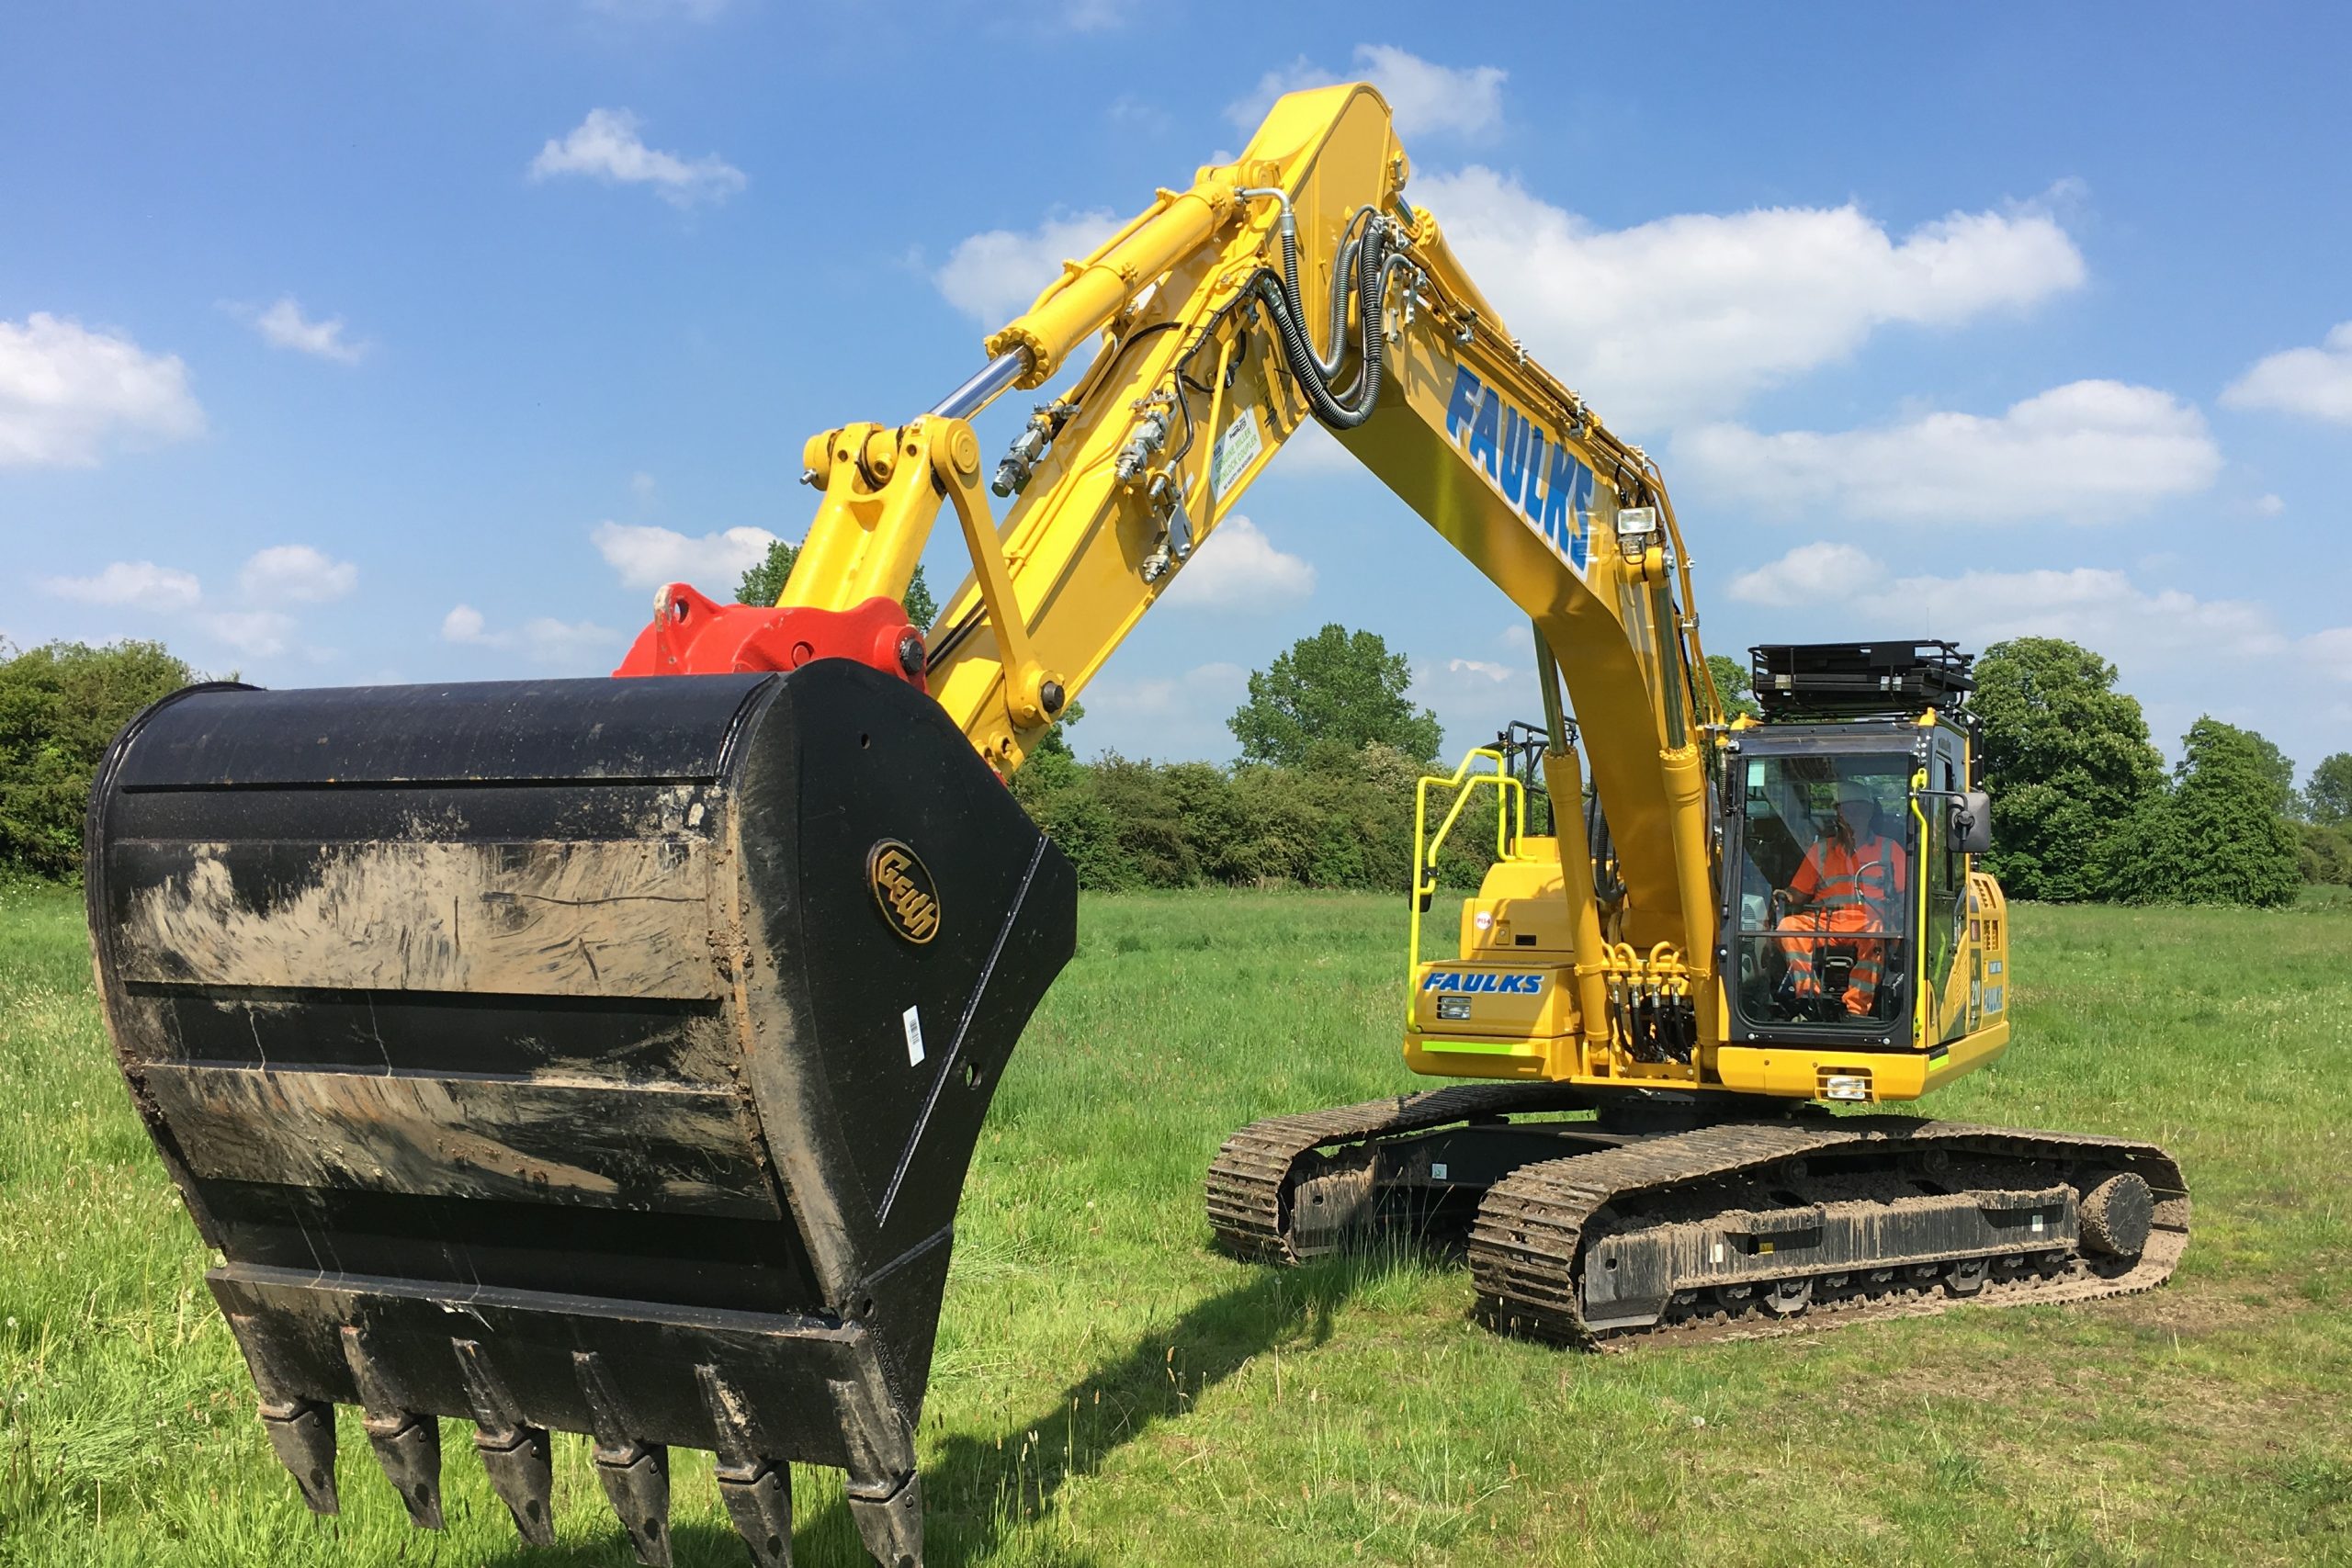 Yellow excavator available for plant hire in Nottinghamshire